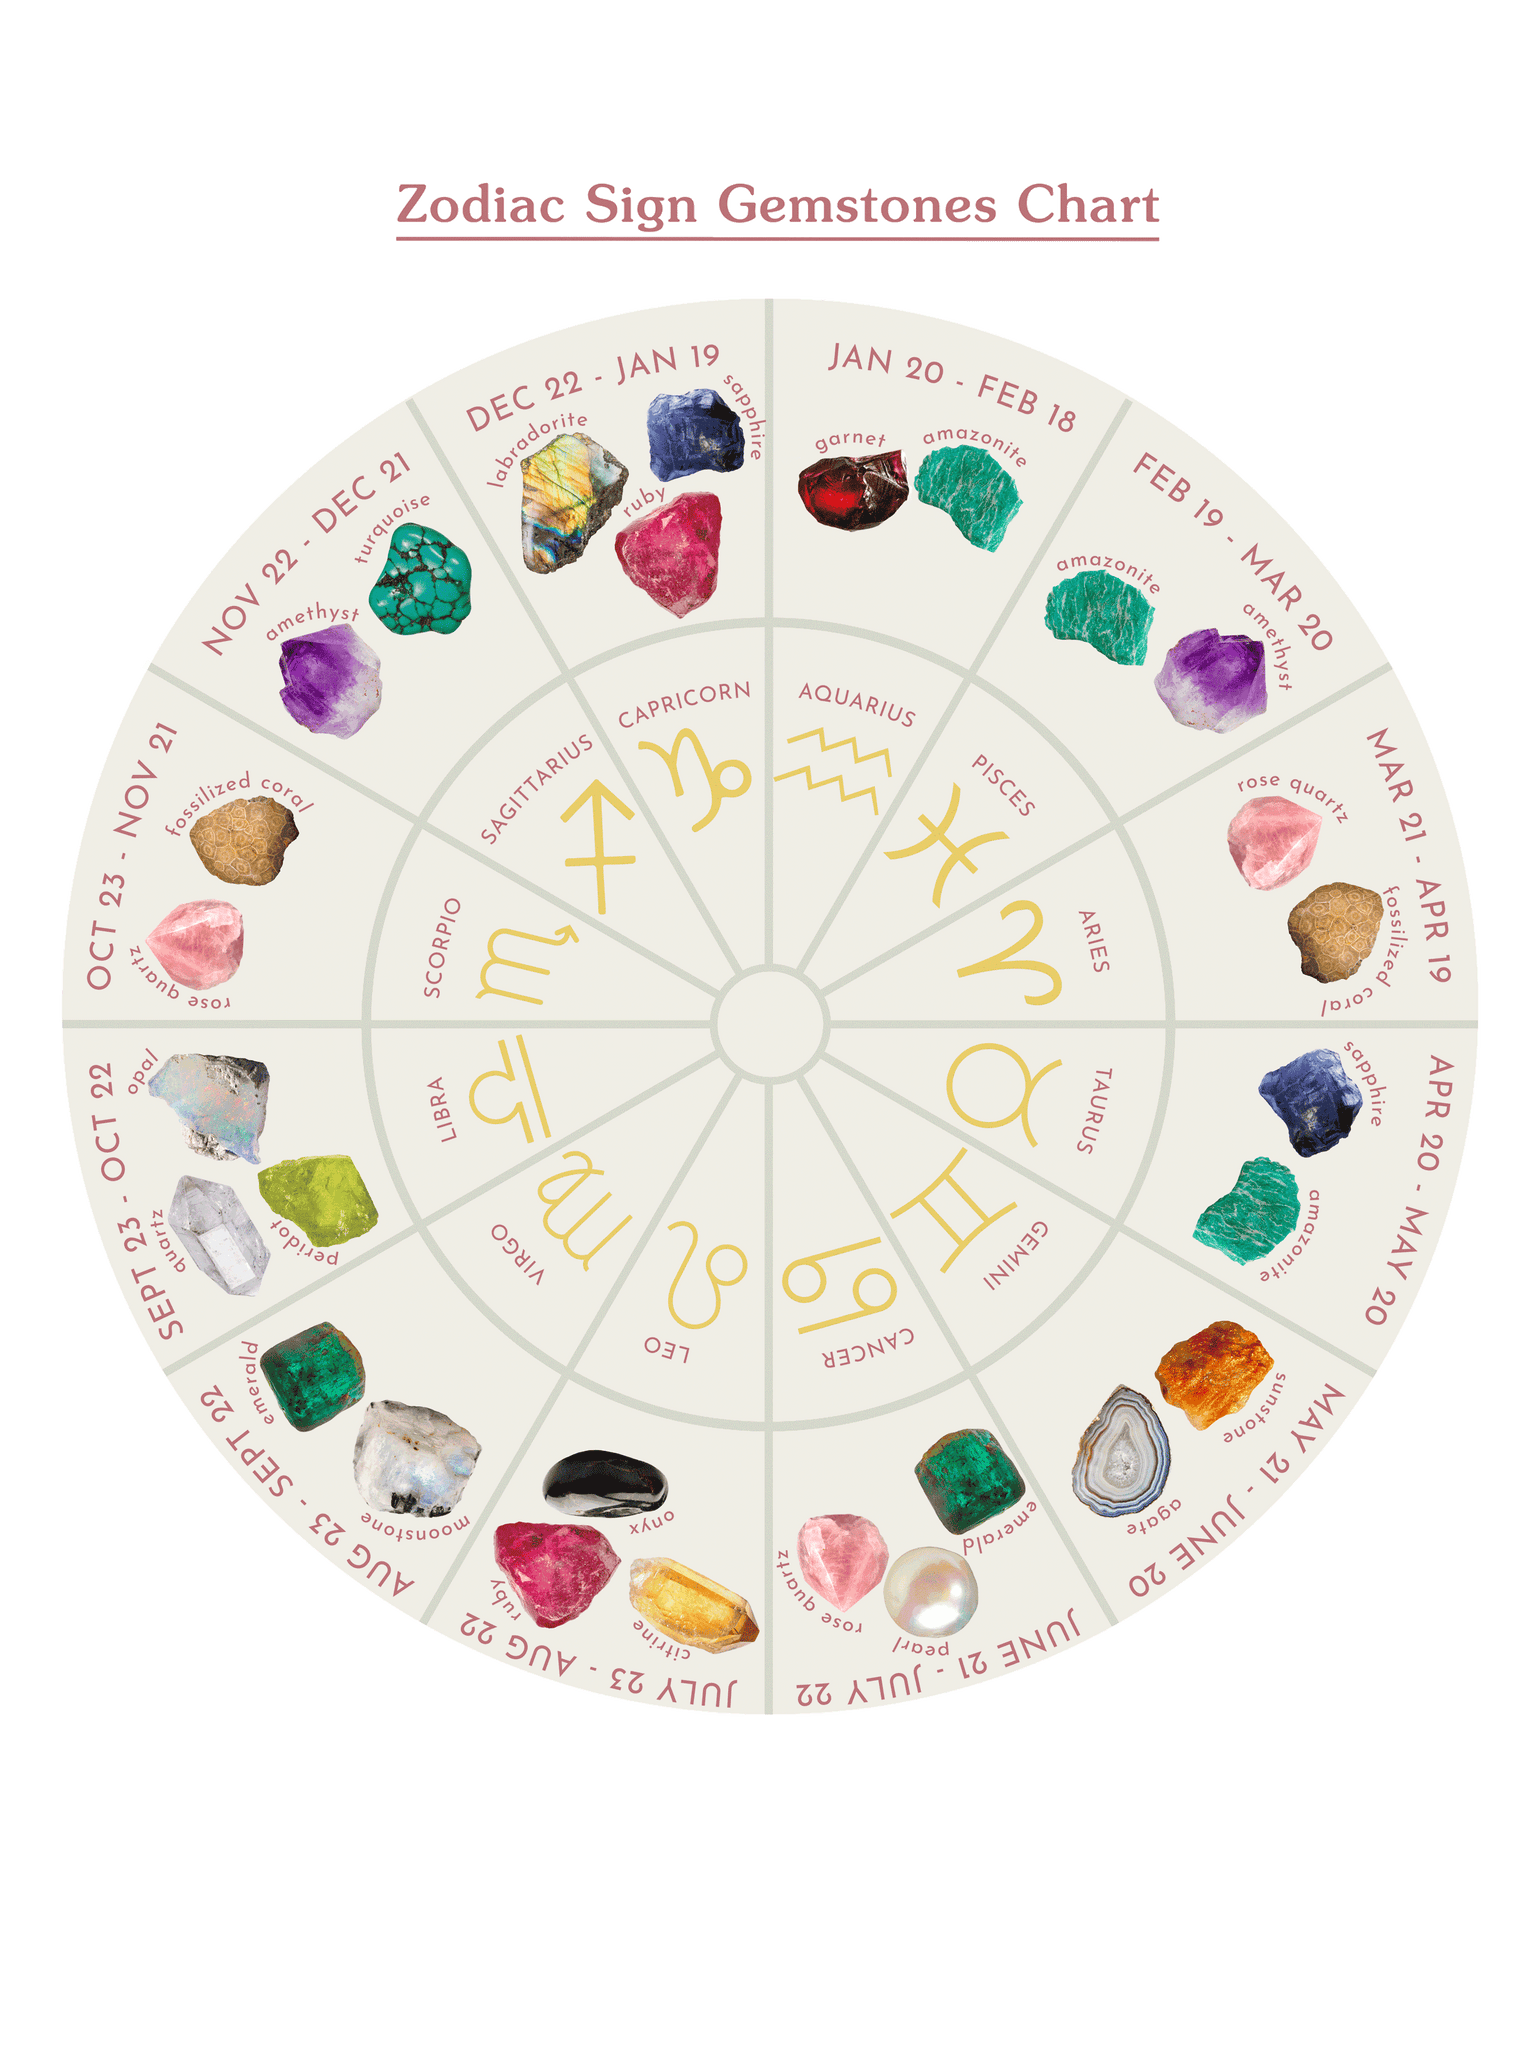 Zodiac Signs And Their Gemstones On White Background Stock Photo ...